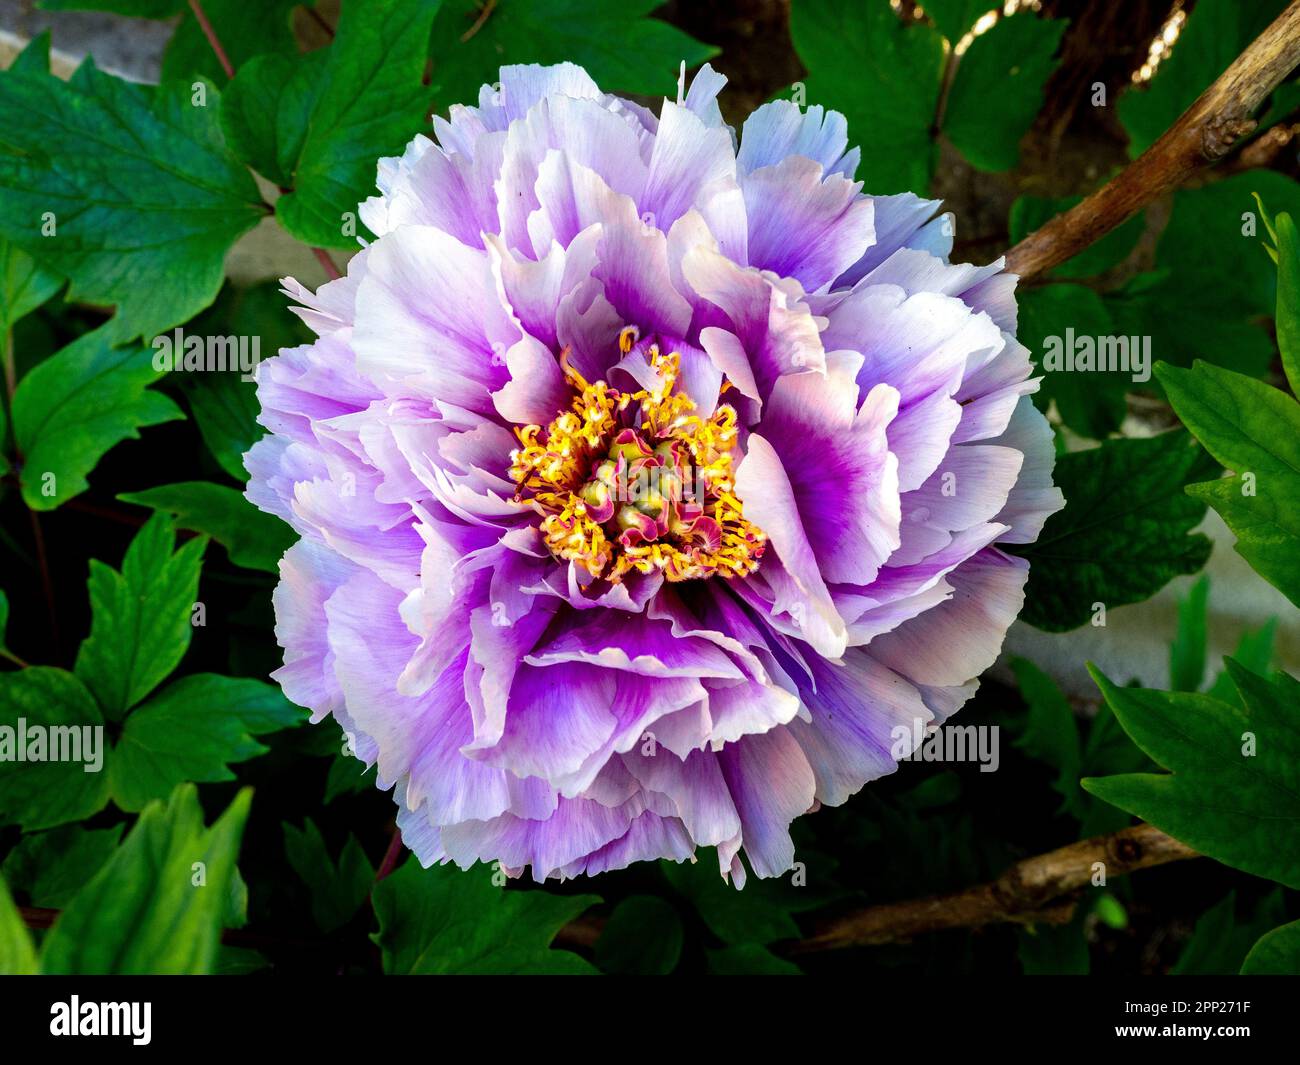 detail of a purple peony (Paeonia suffruticosa) flower with blurred background Stock Photo